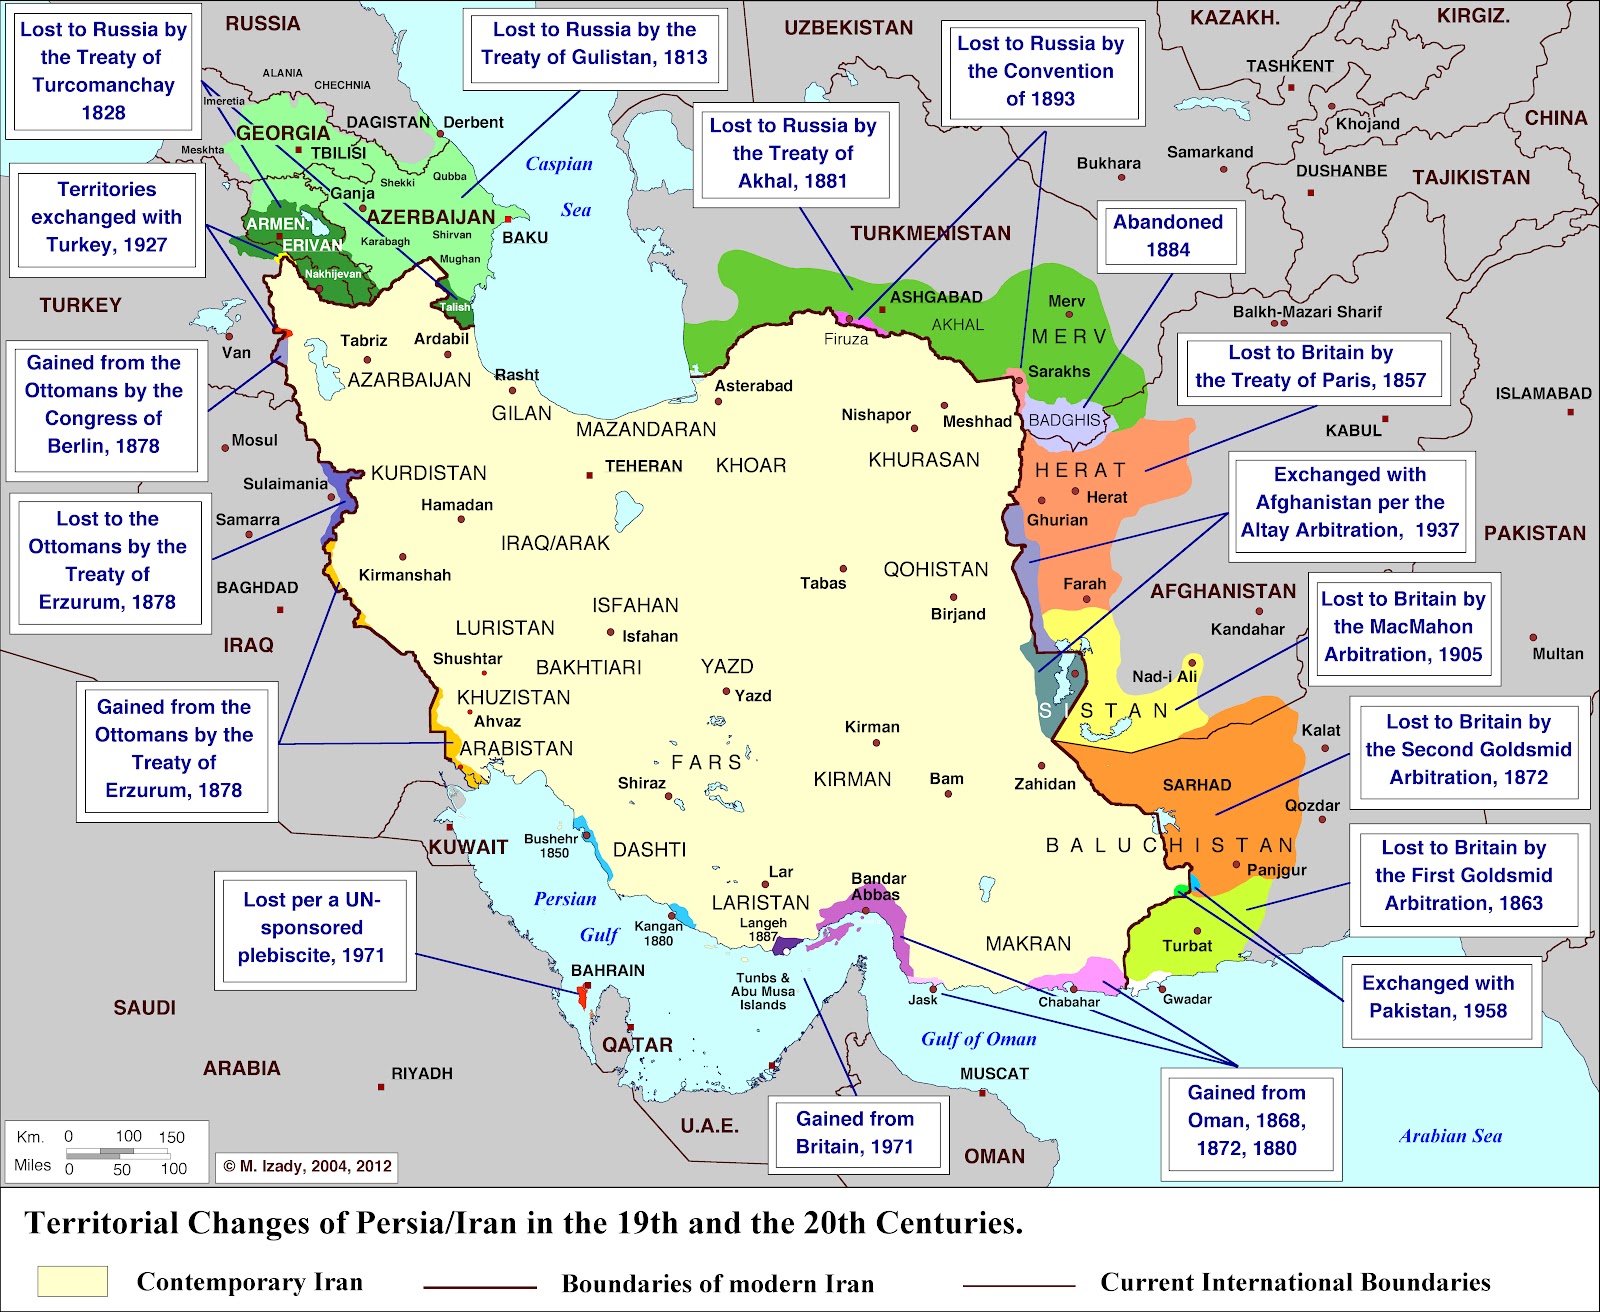 Map showing territories lost and gained by Iran over the past two centuries